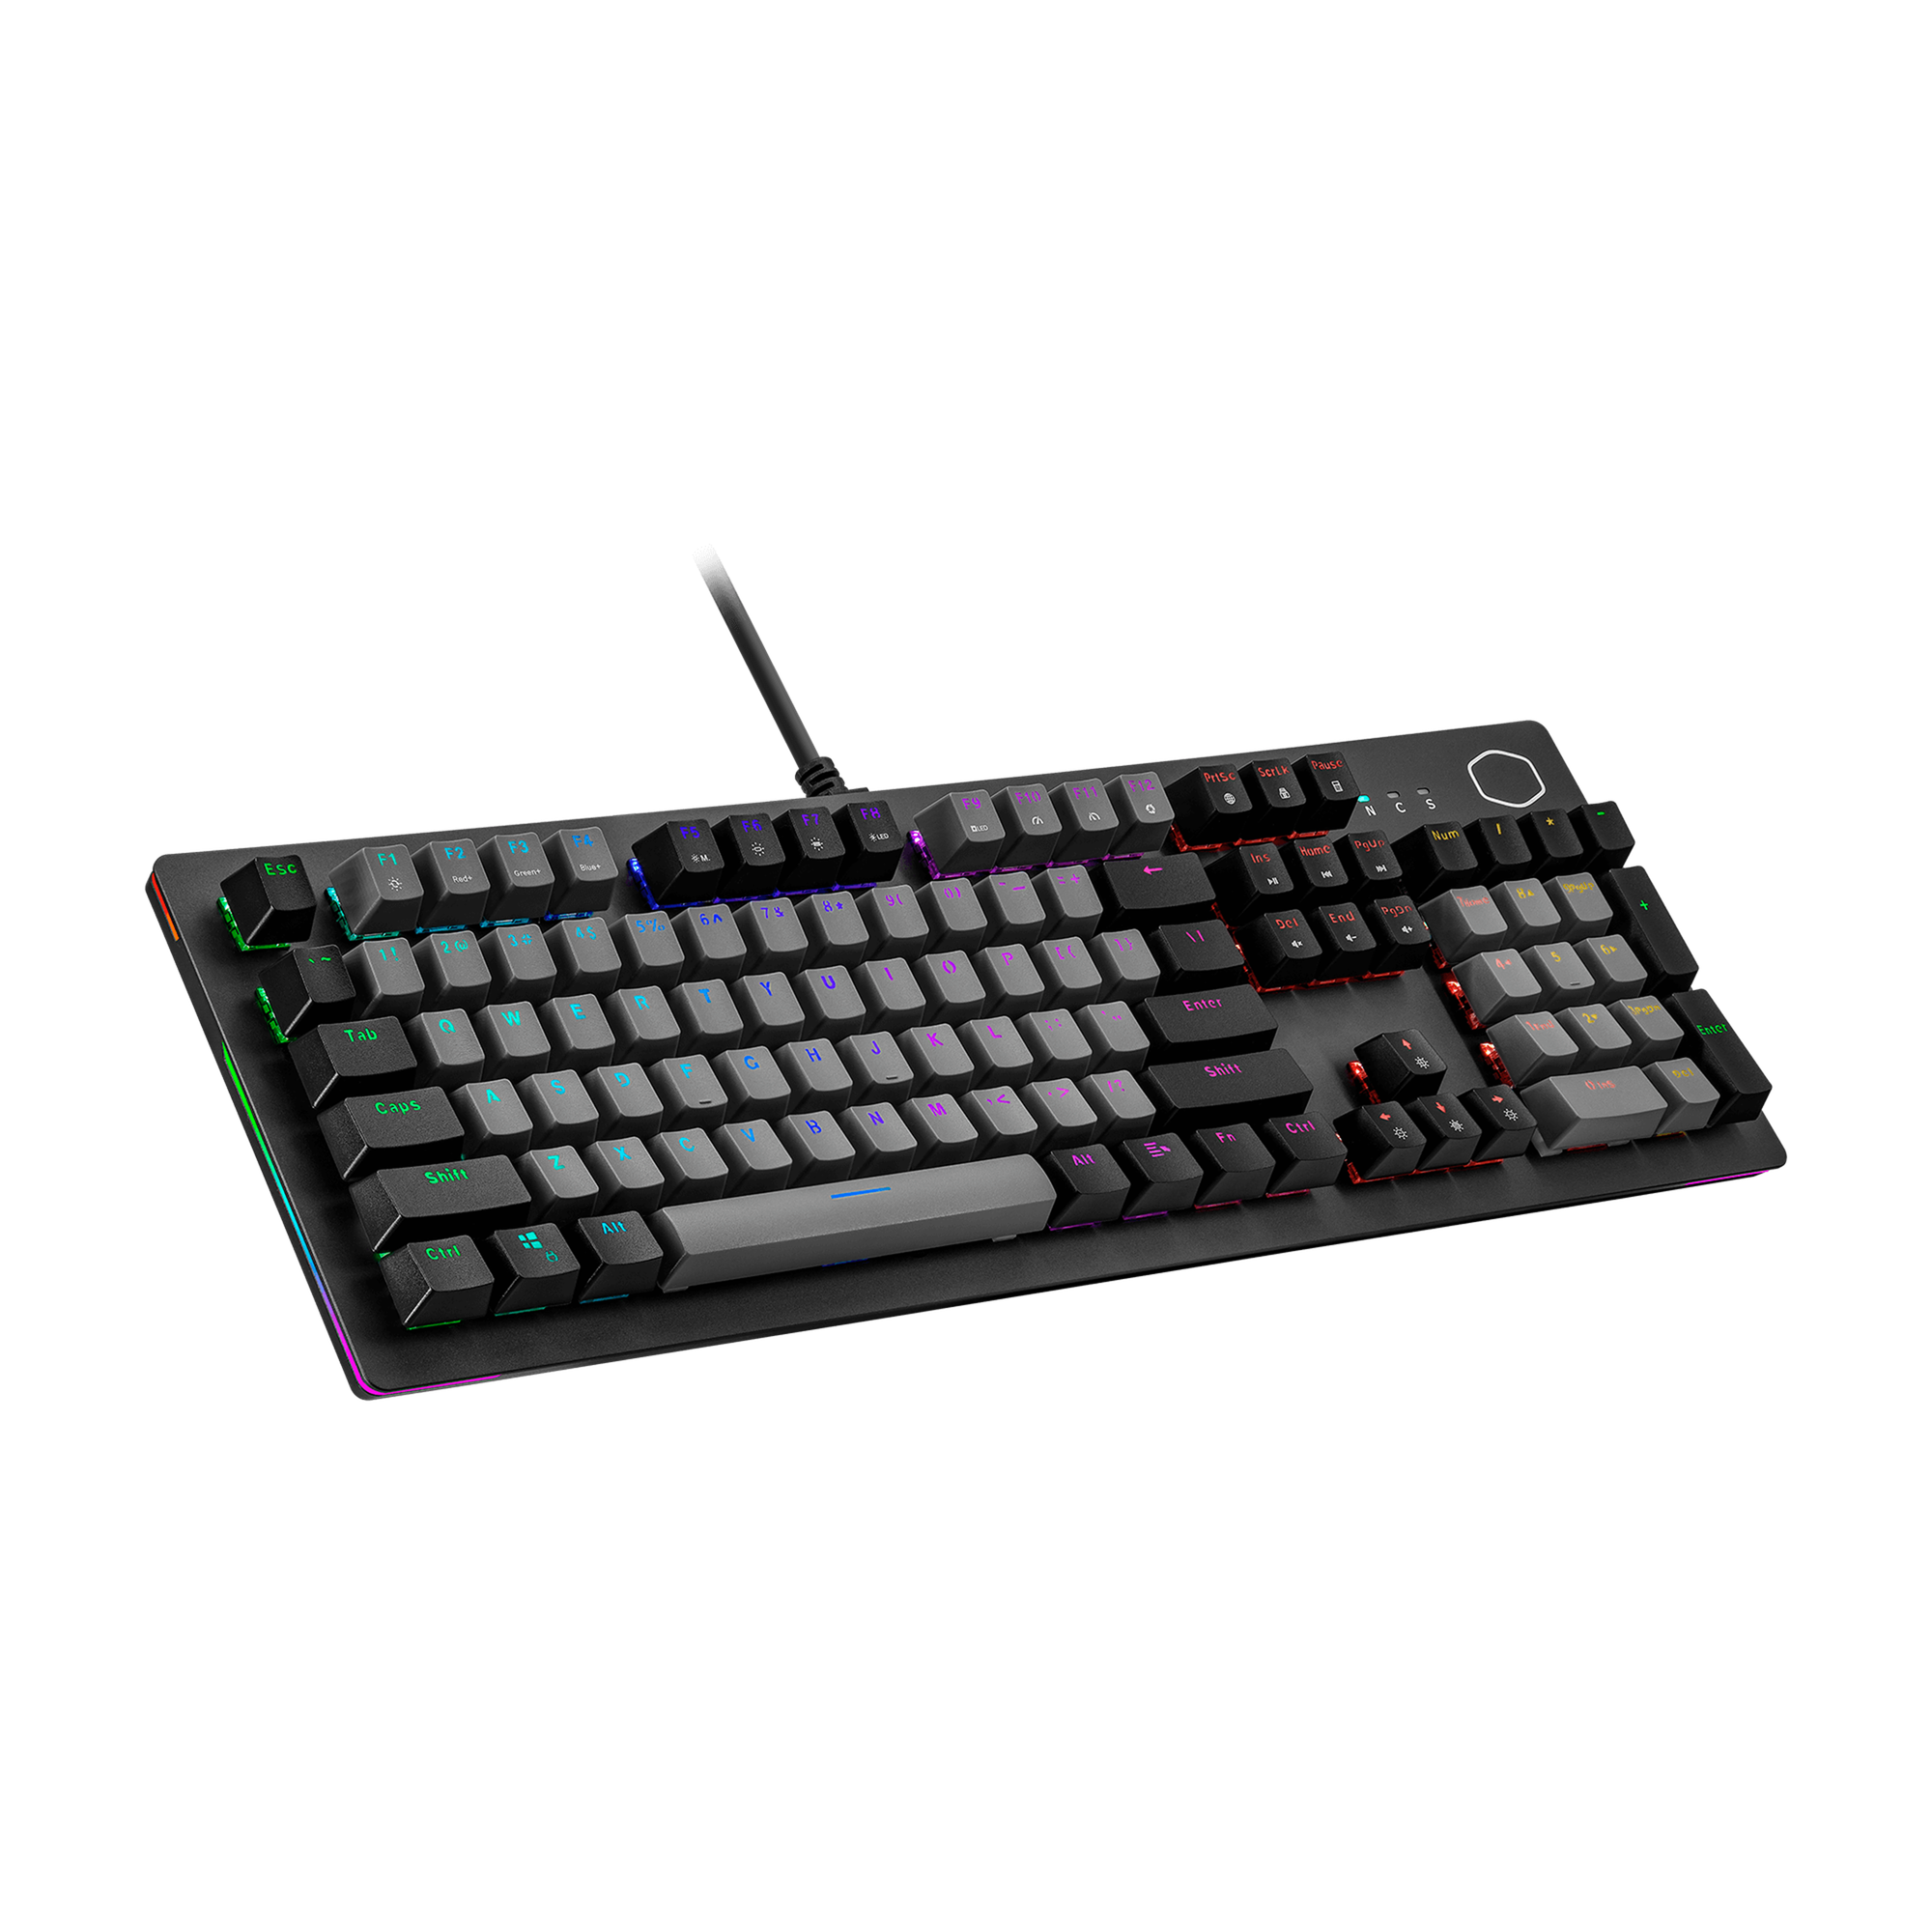 Cooler Master CK352 Gaming Mechanical Keyboard Red Switch with RGB Backlighting & Side LightBars Color(Black&Grey) (عربي)